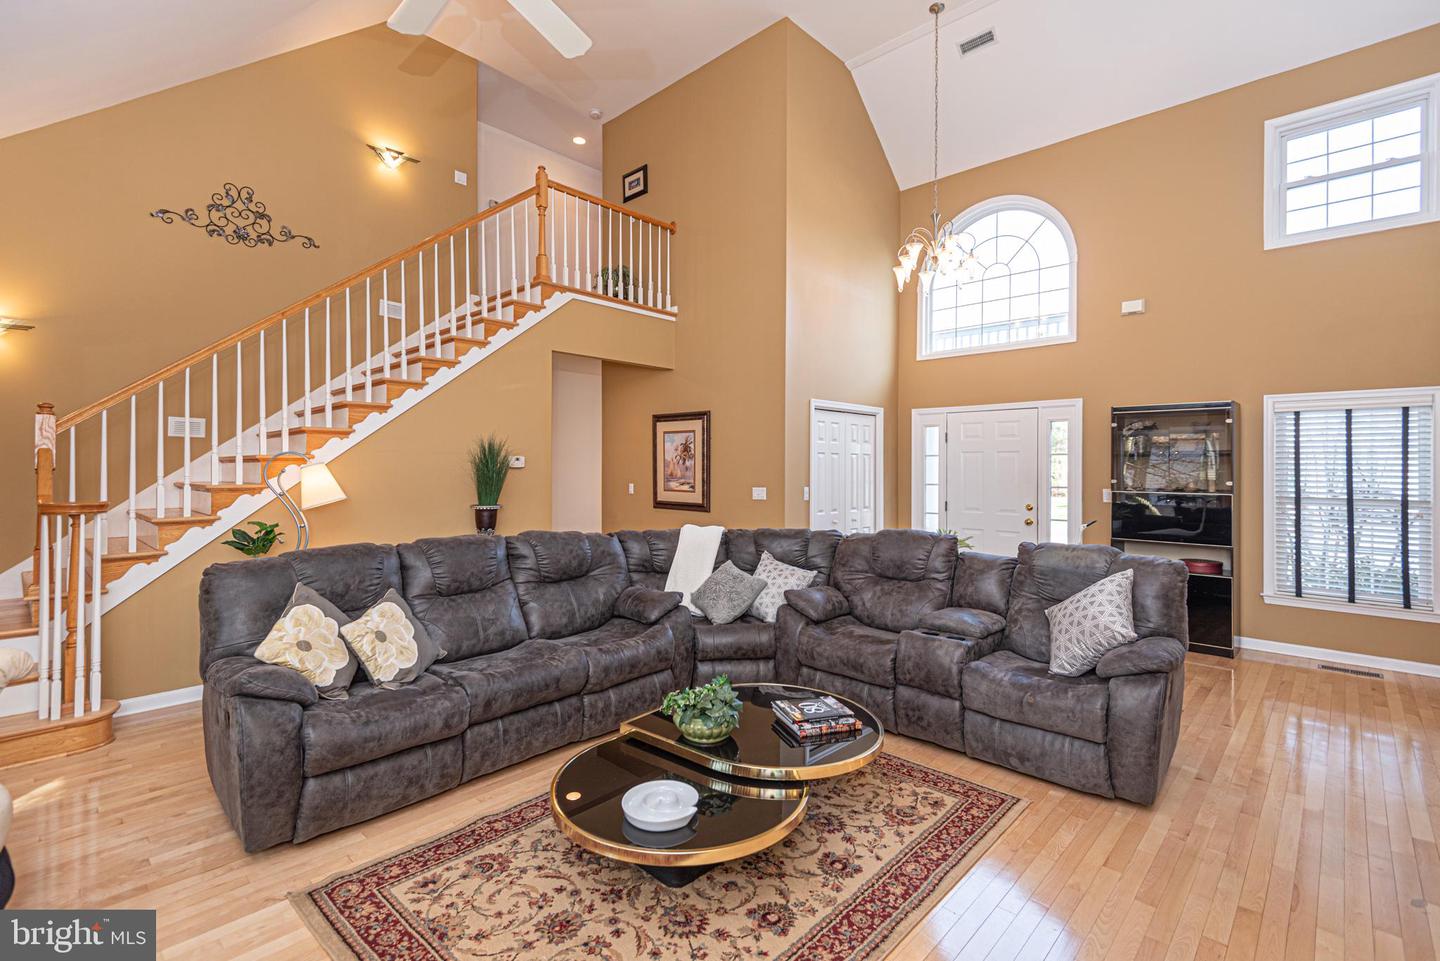 MDWO2019426-802903995218-2024-03-08-00-14-50 106 Pine Forest Dr | Berlin, MD Real Estate For Sale | MLS# Mdwo2019426  - 1st Choice Properties